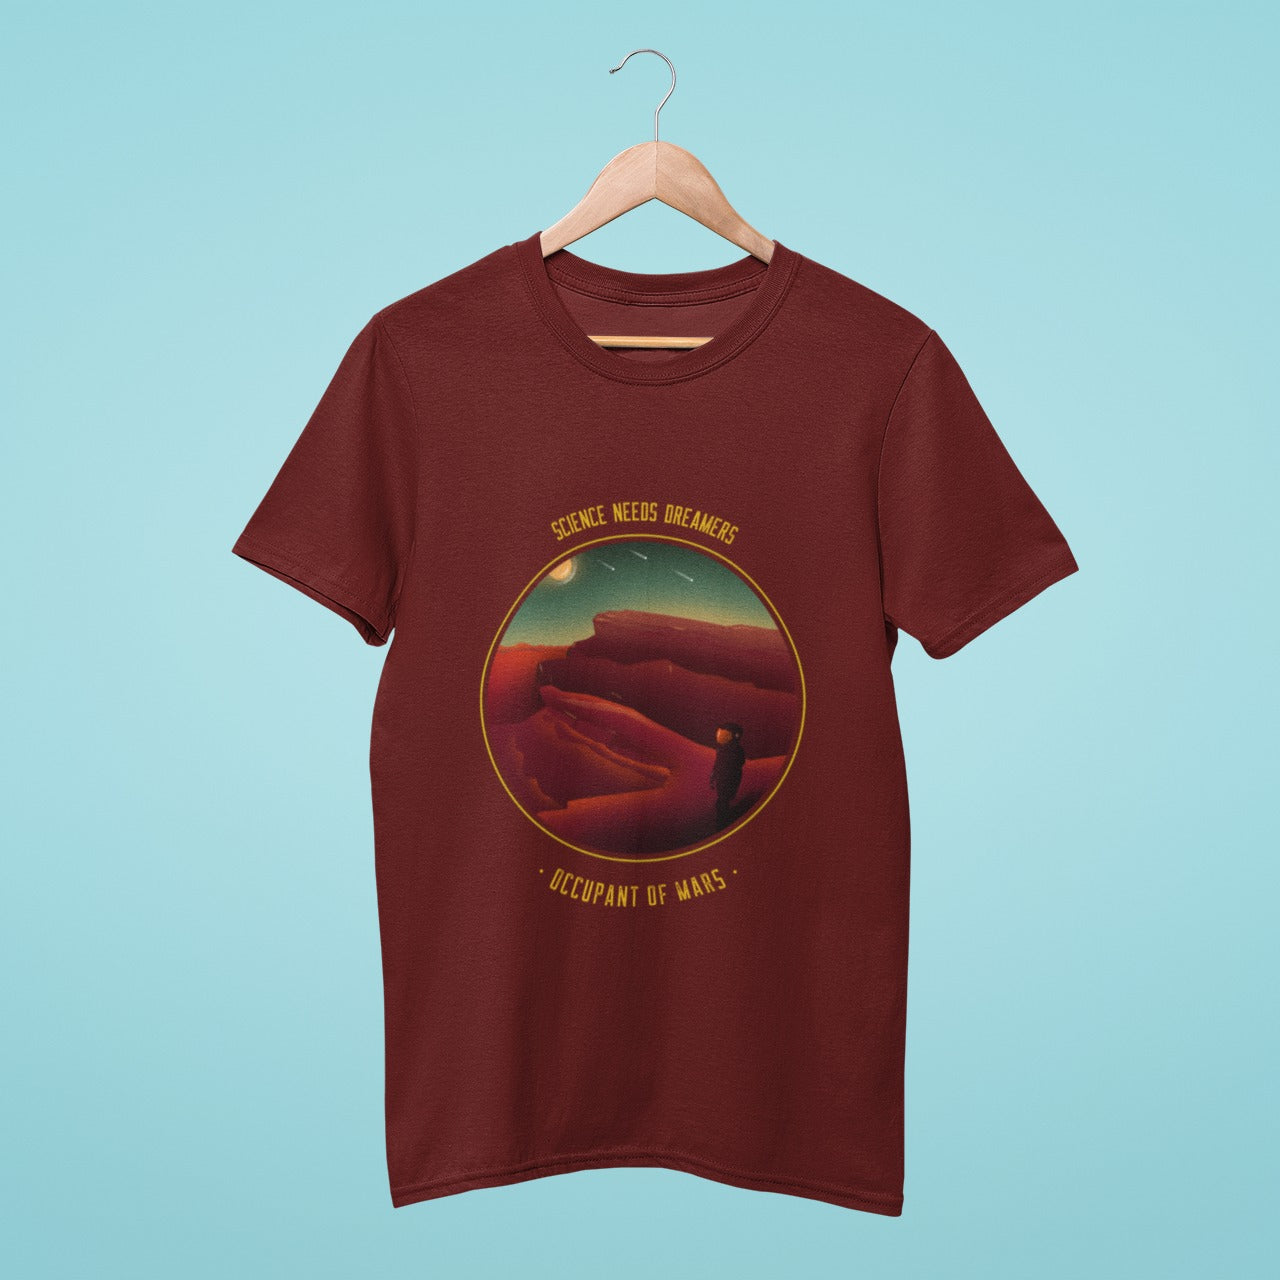 Science needs dreamers" - this brown t-shirt with an occupant of Mars graphic and slogan is perfect for those who believe in pushing the boundaries of space exploration. Join the journey to the red planet and inspire others to dream big!